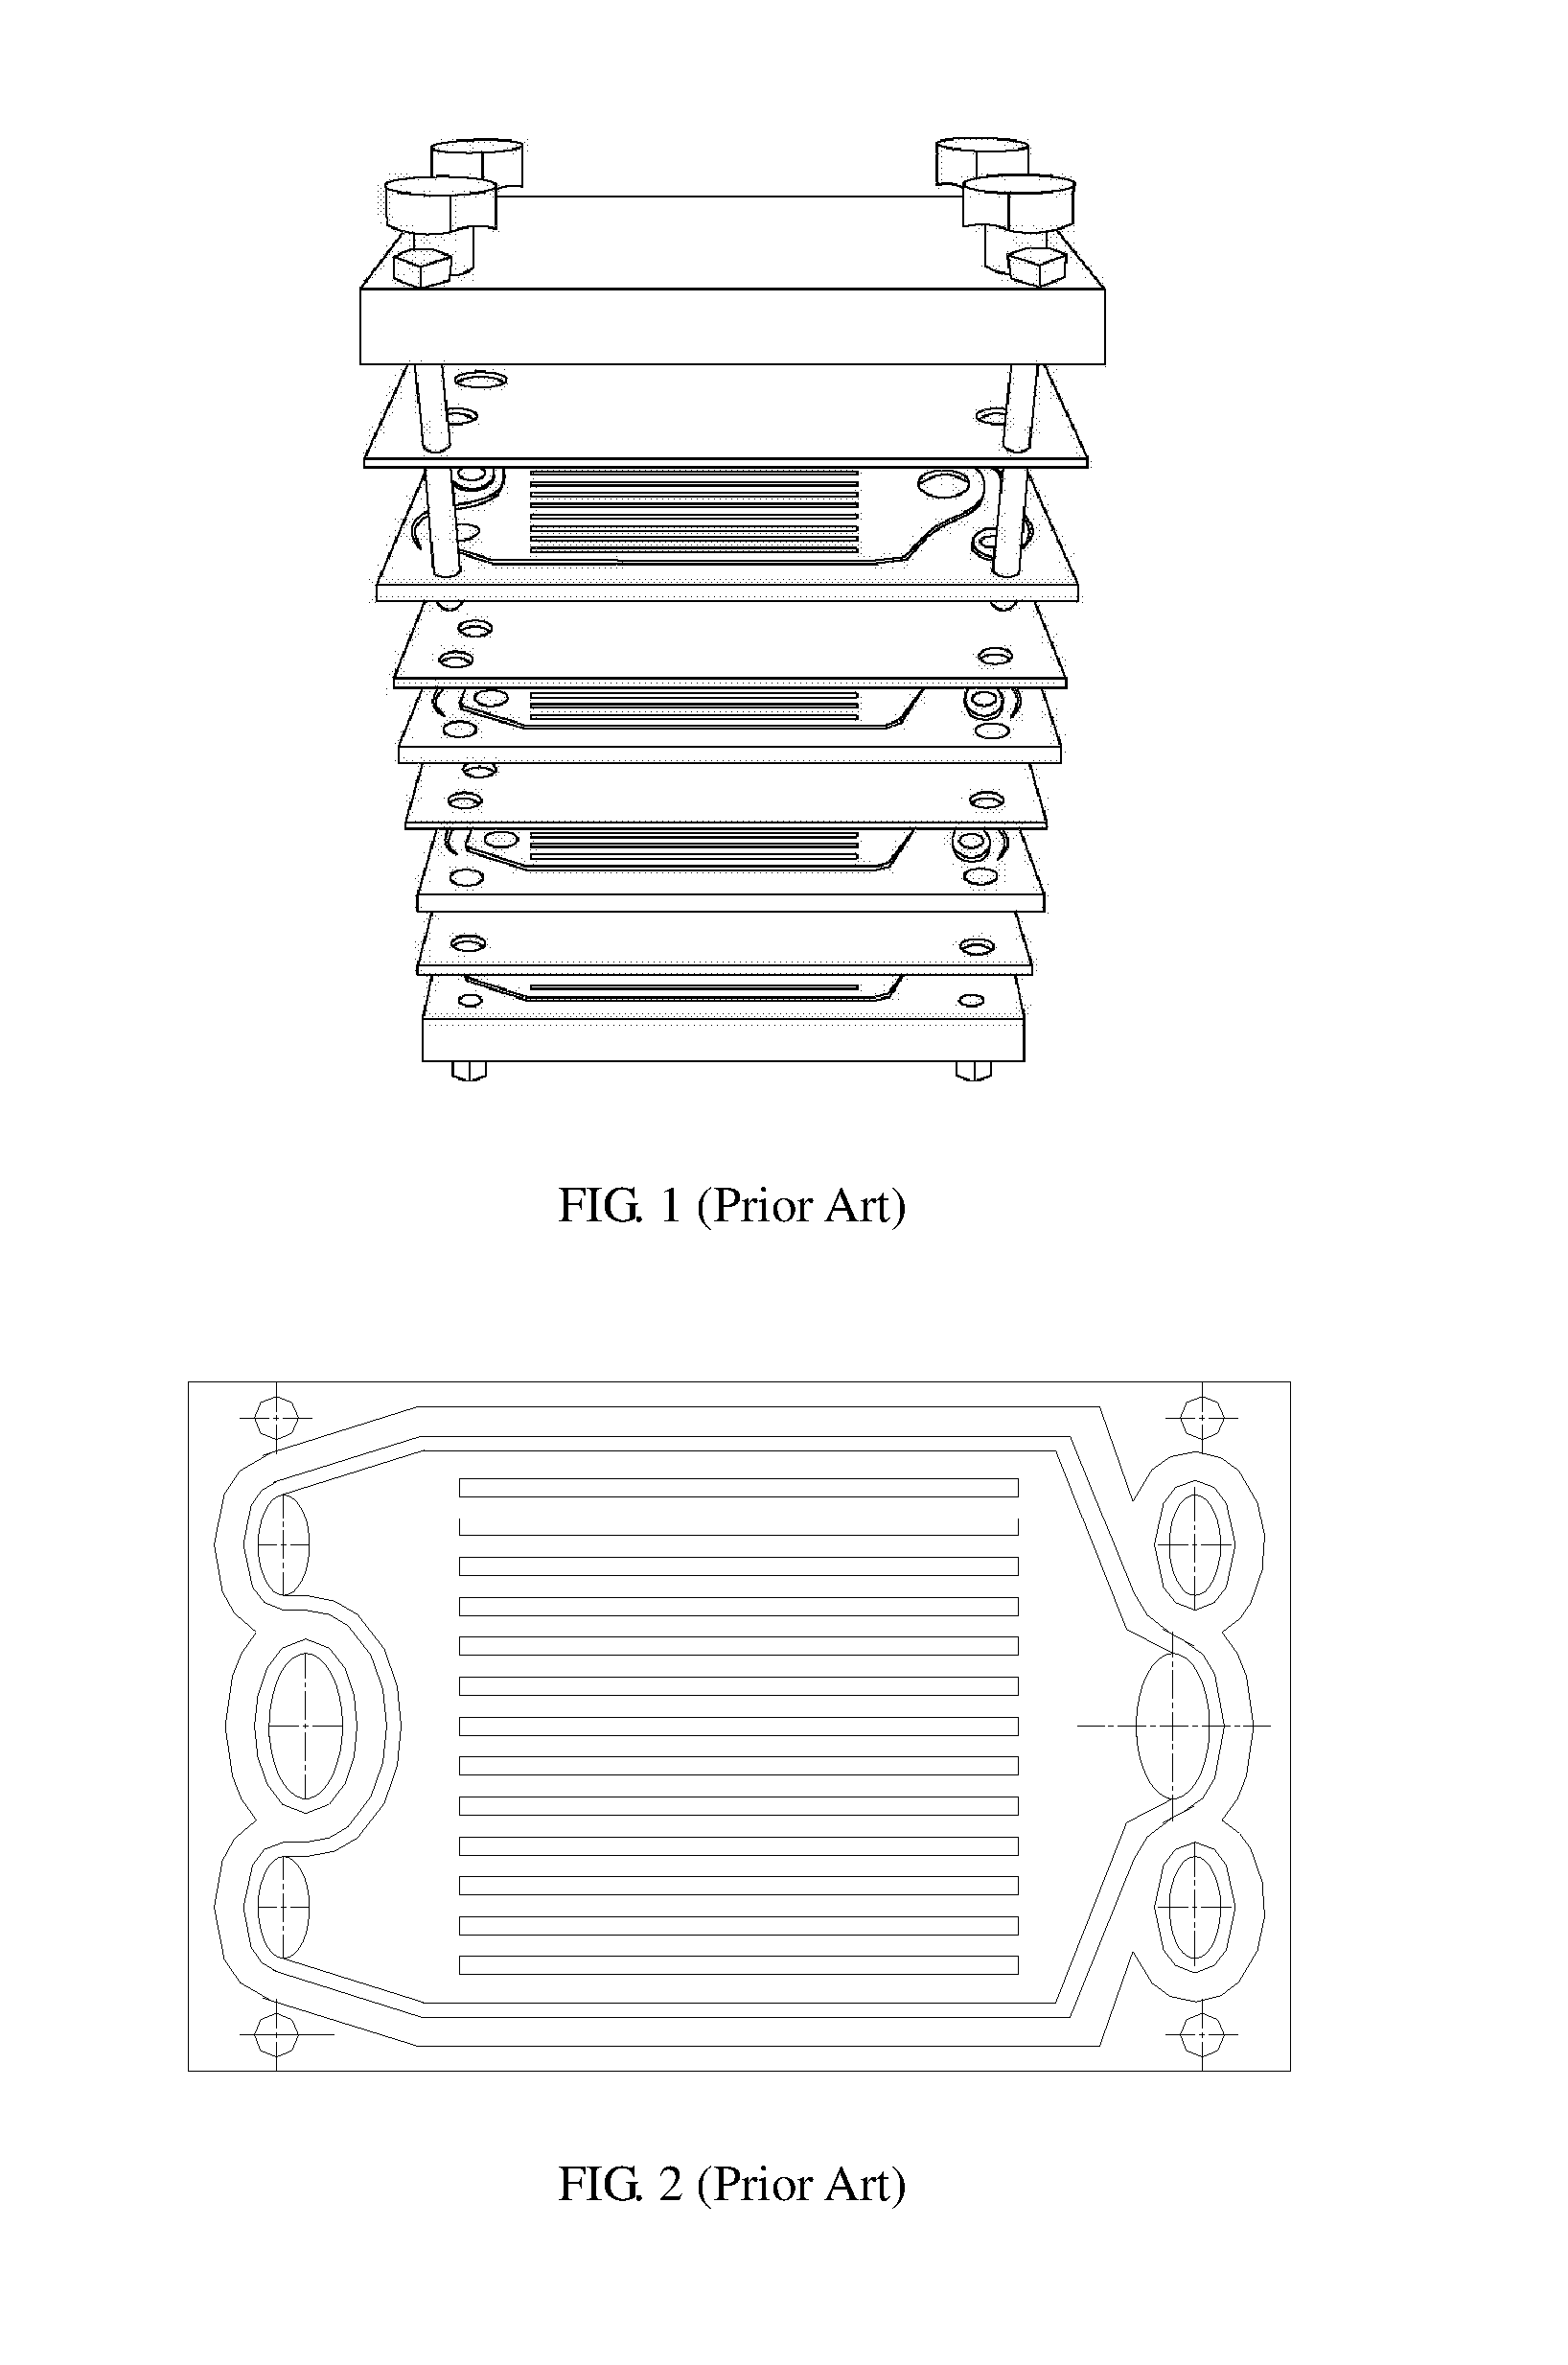 Improvement on the uniformity of fluid flow rate for interconnecting plate for planar solid oxide fuel cell